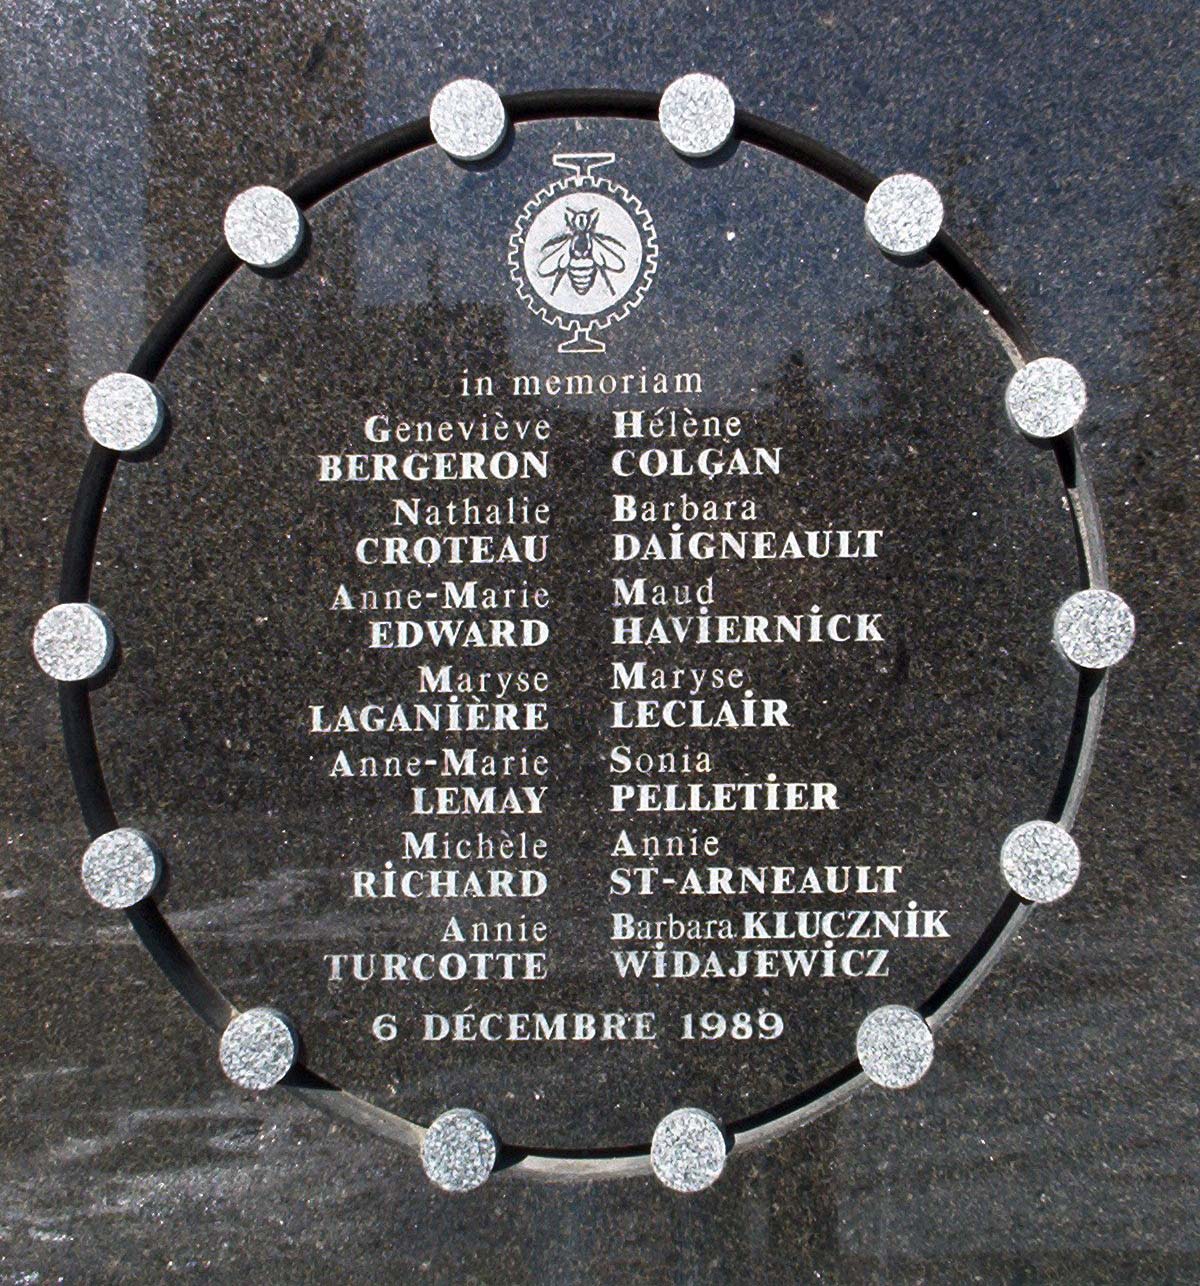 Memorial plaque at Ã‰cole Polytechnique with the 14 names of the women who were killed.